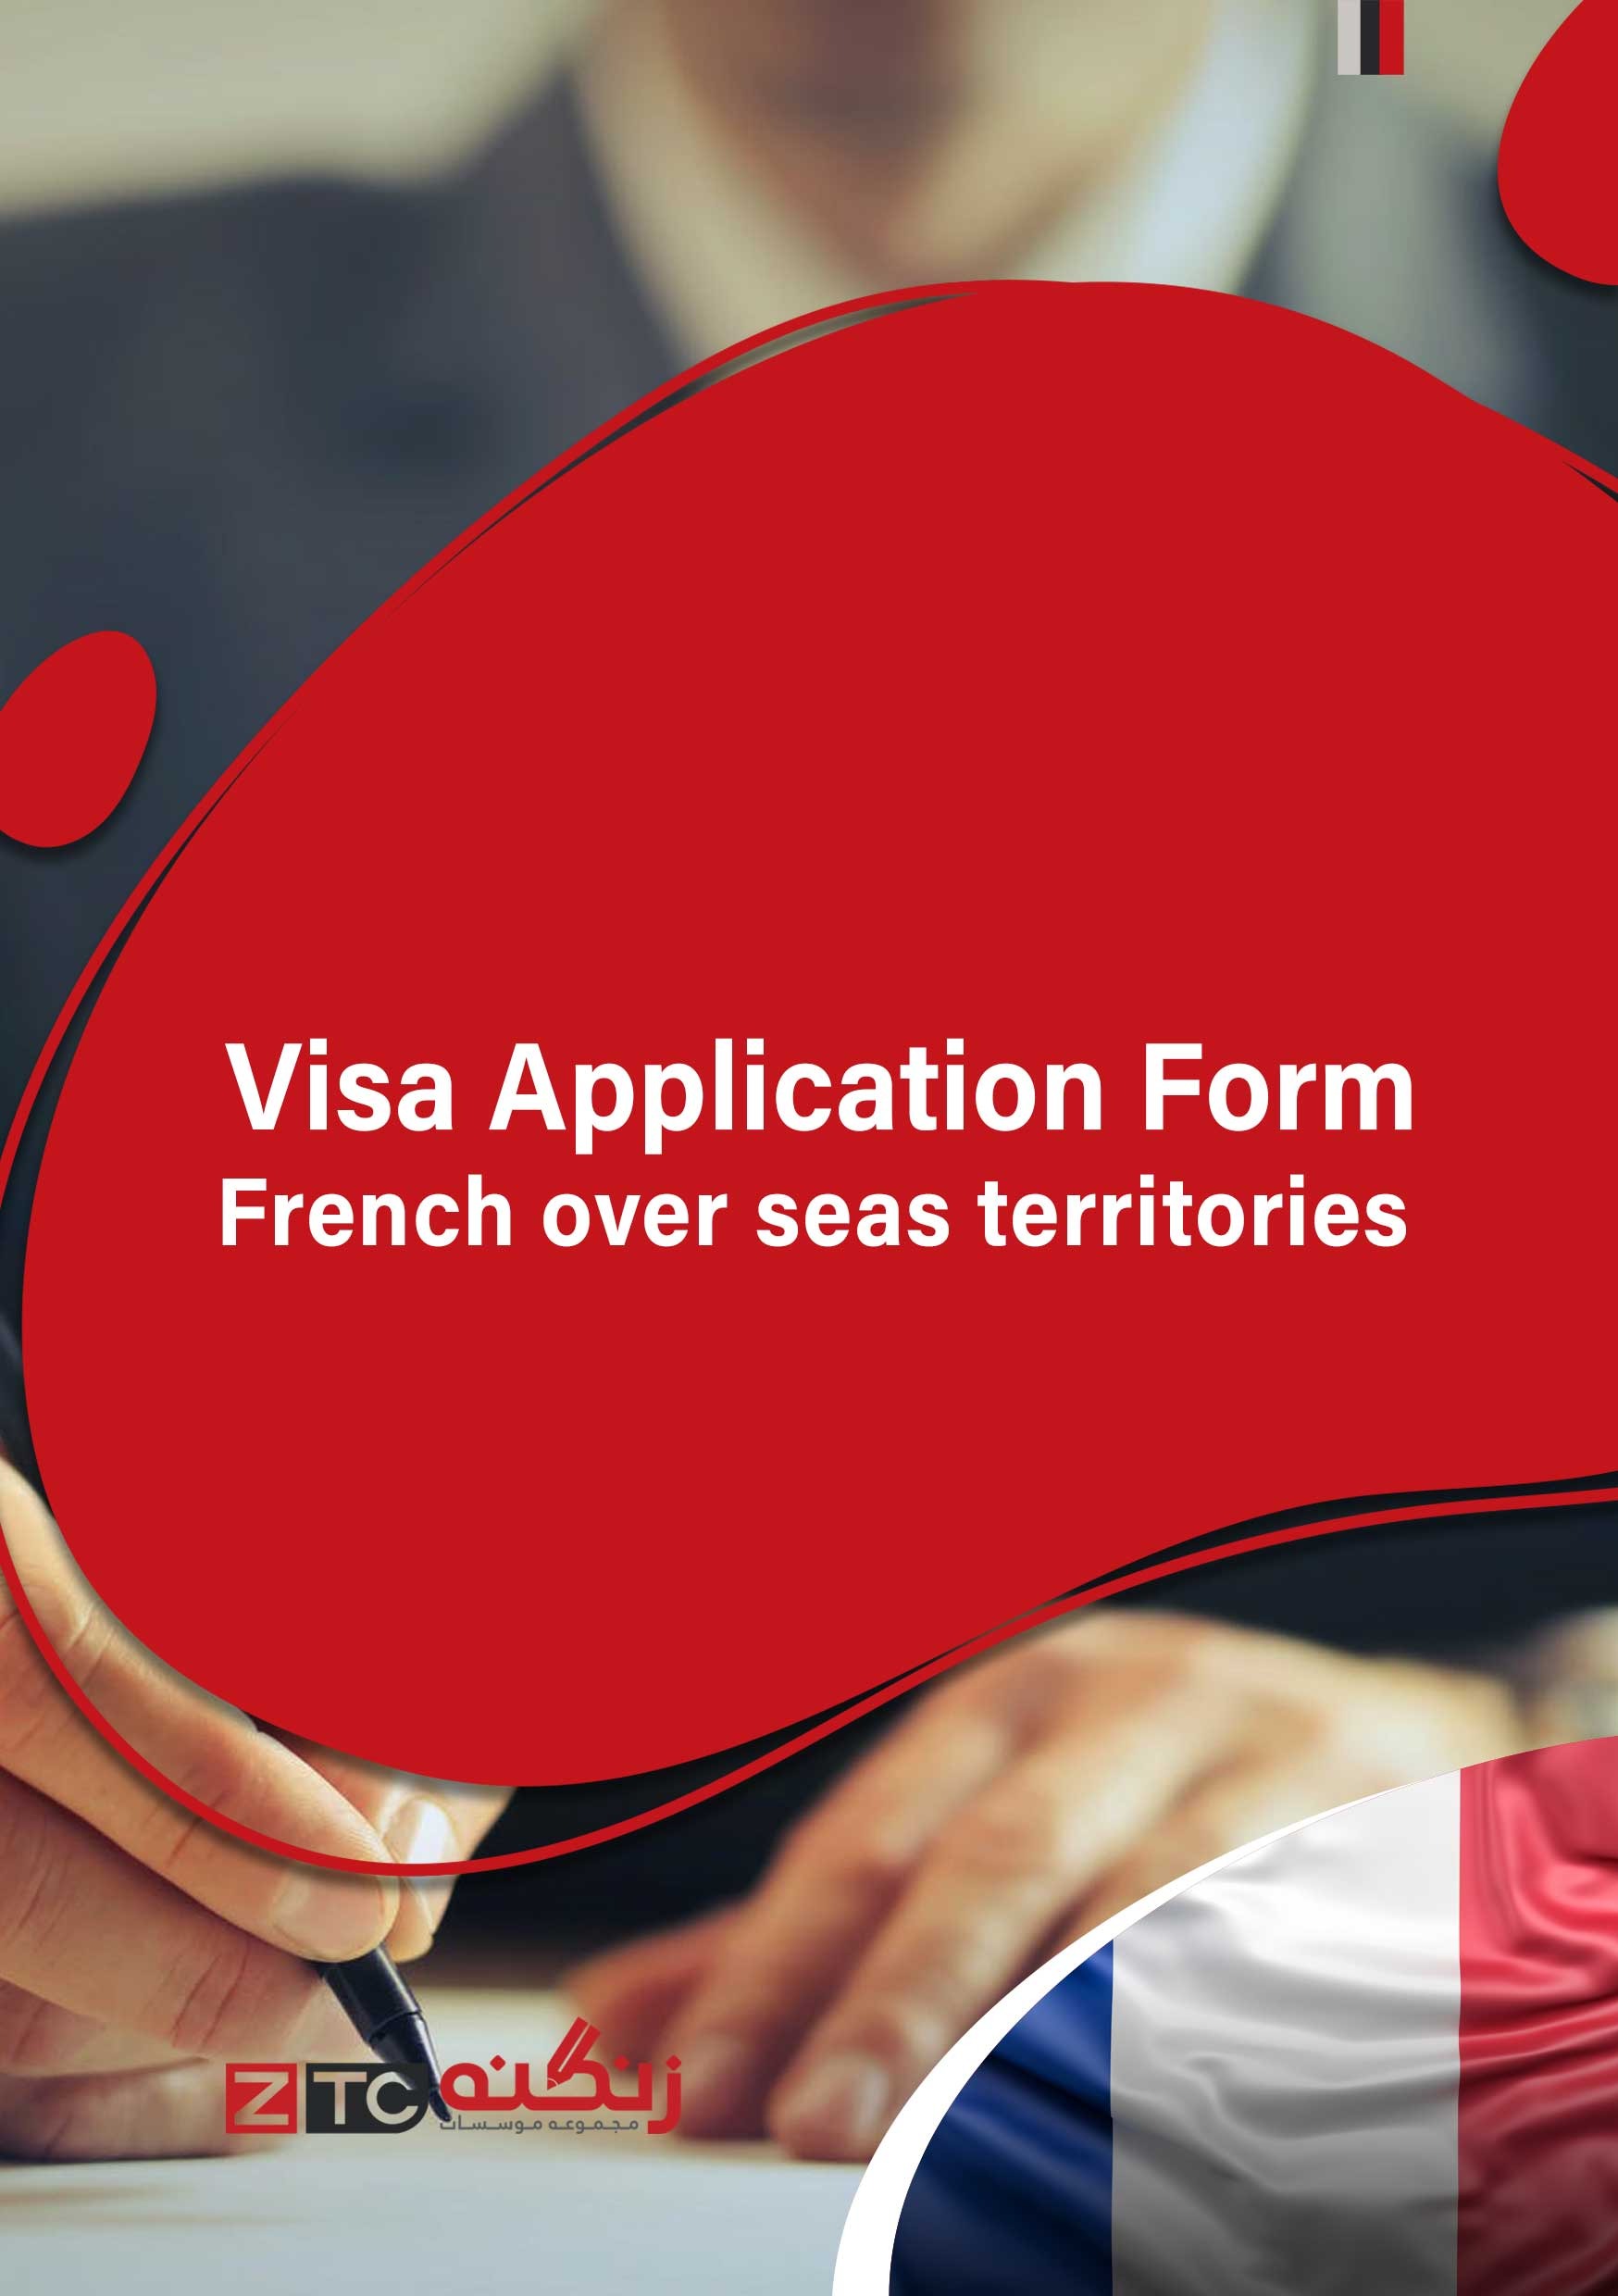 Visa Application Form - French over seas territories